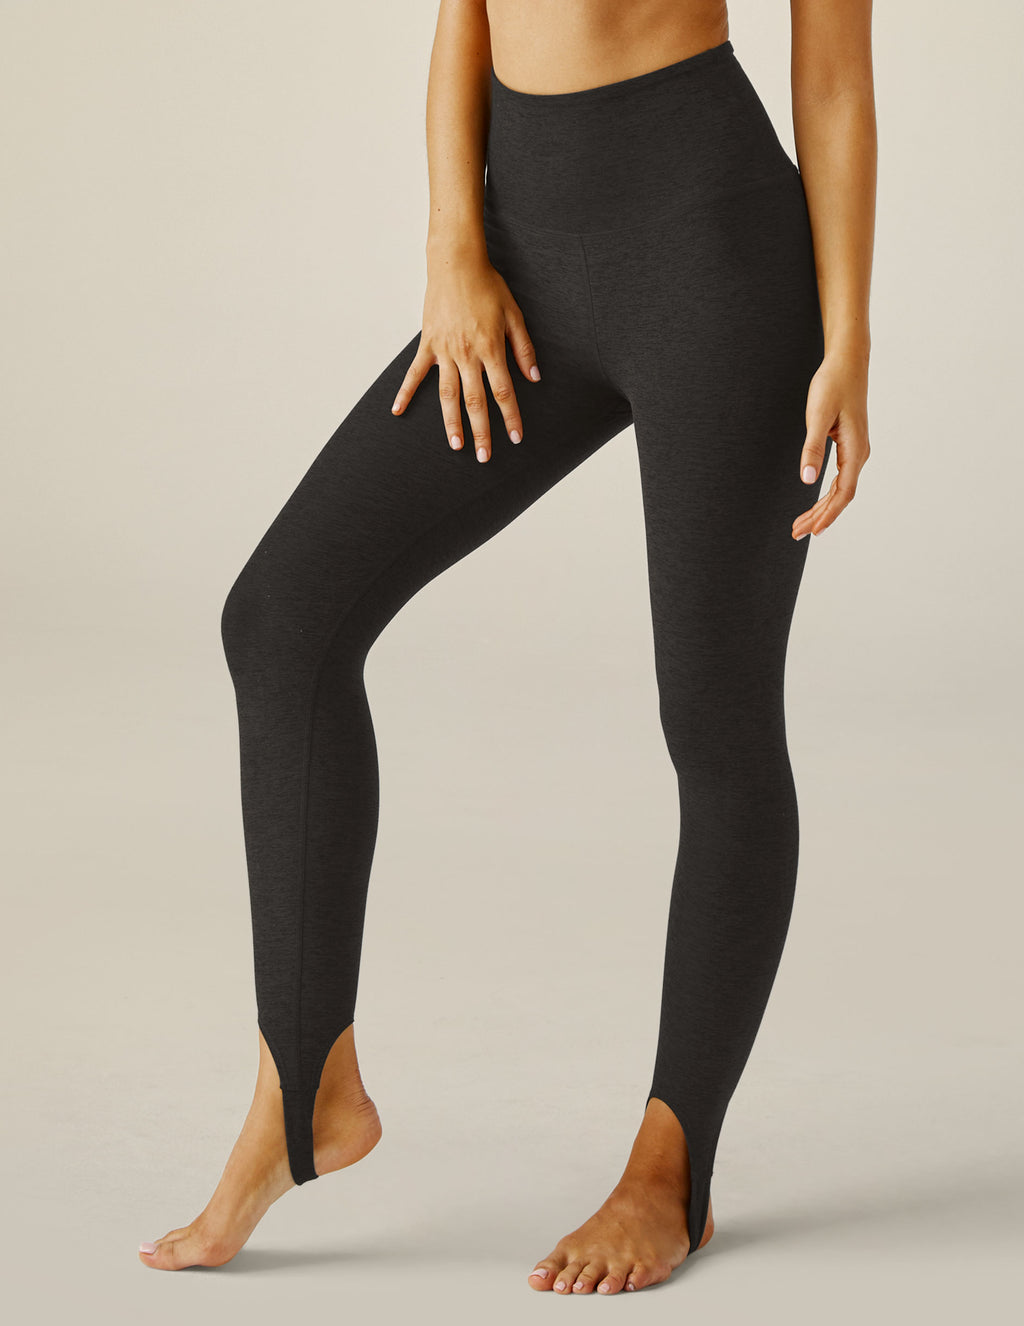 Spacedye Well Rounded Stirrup Legging Featured Image